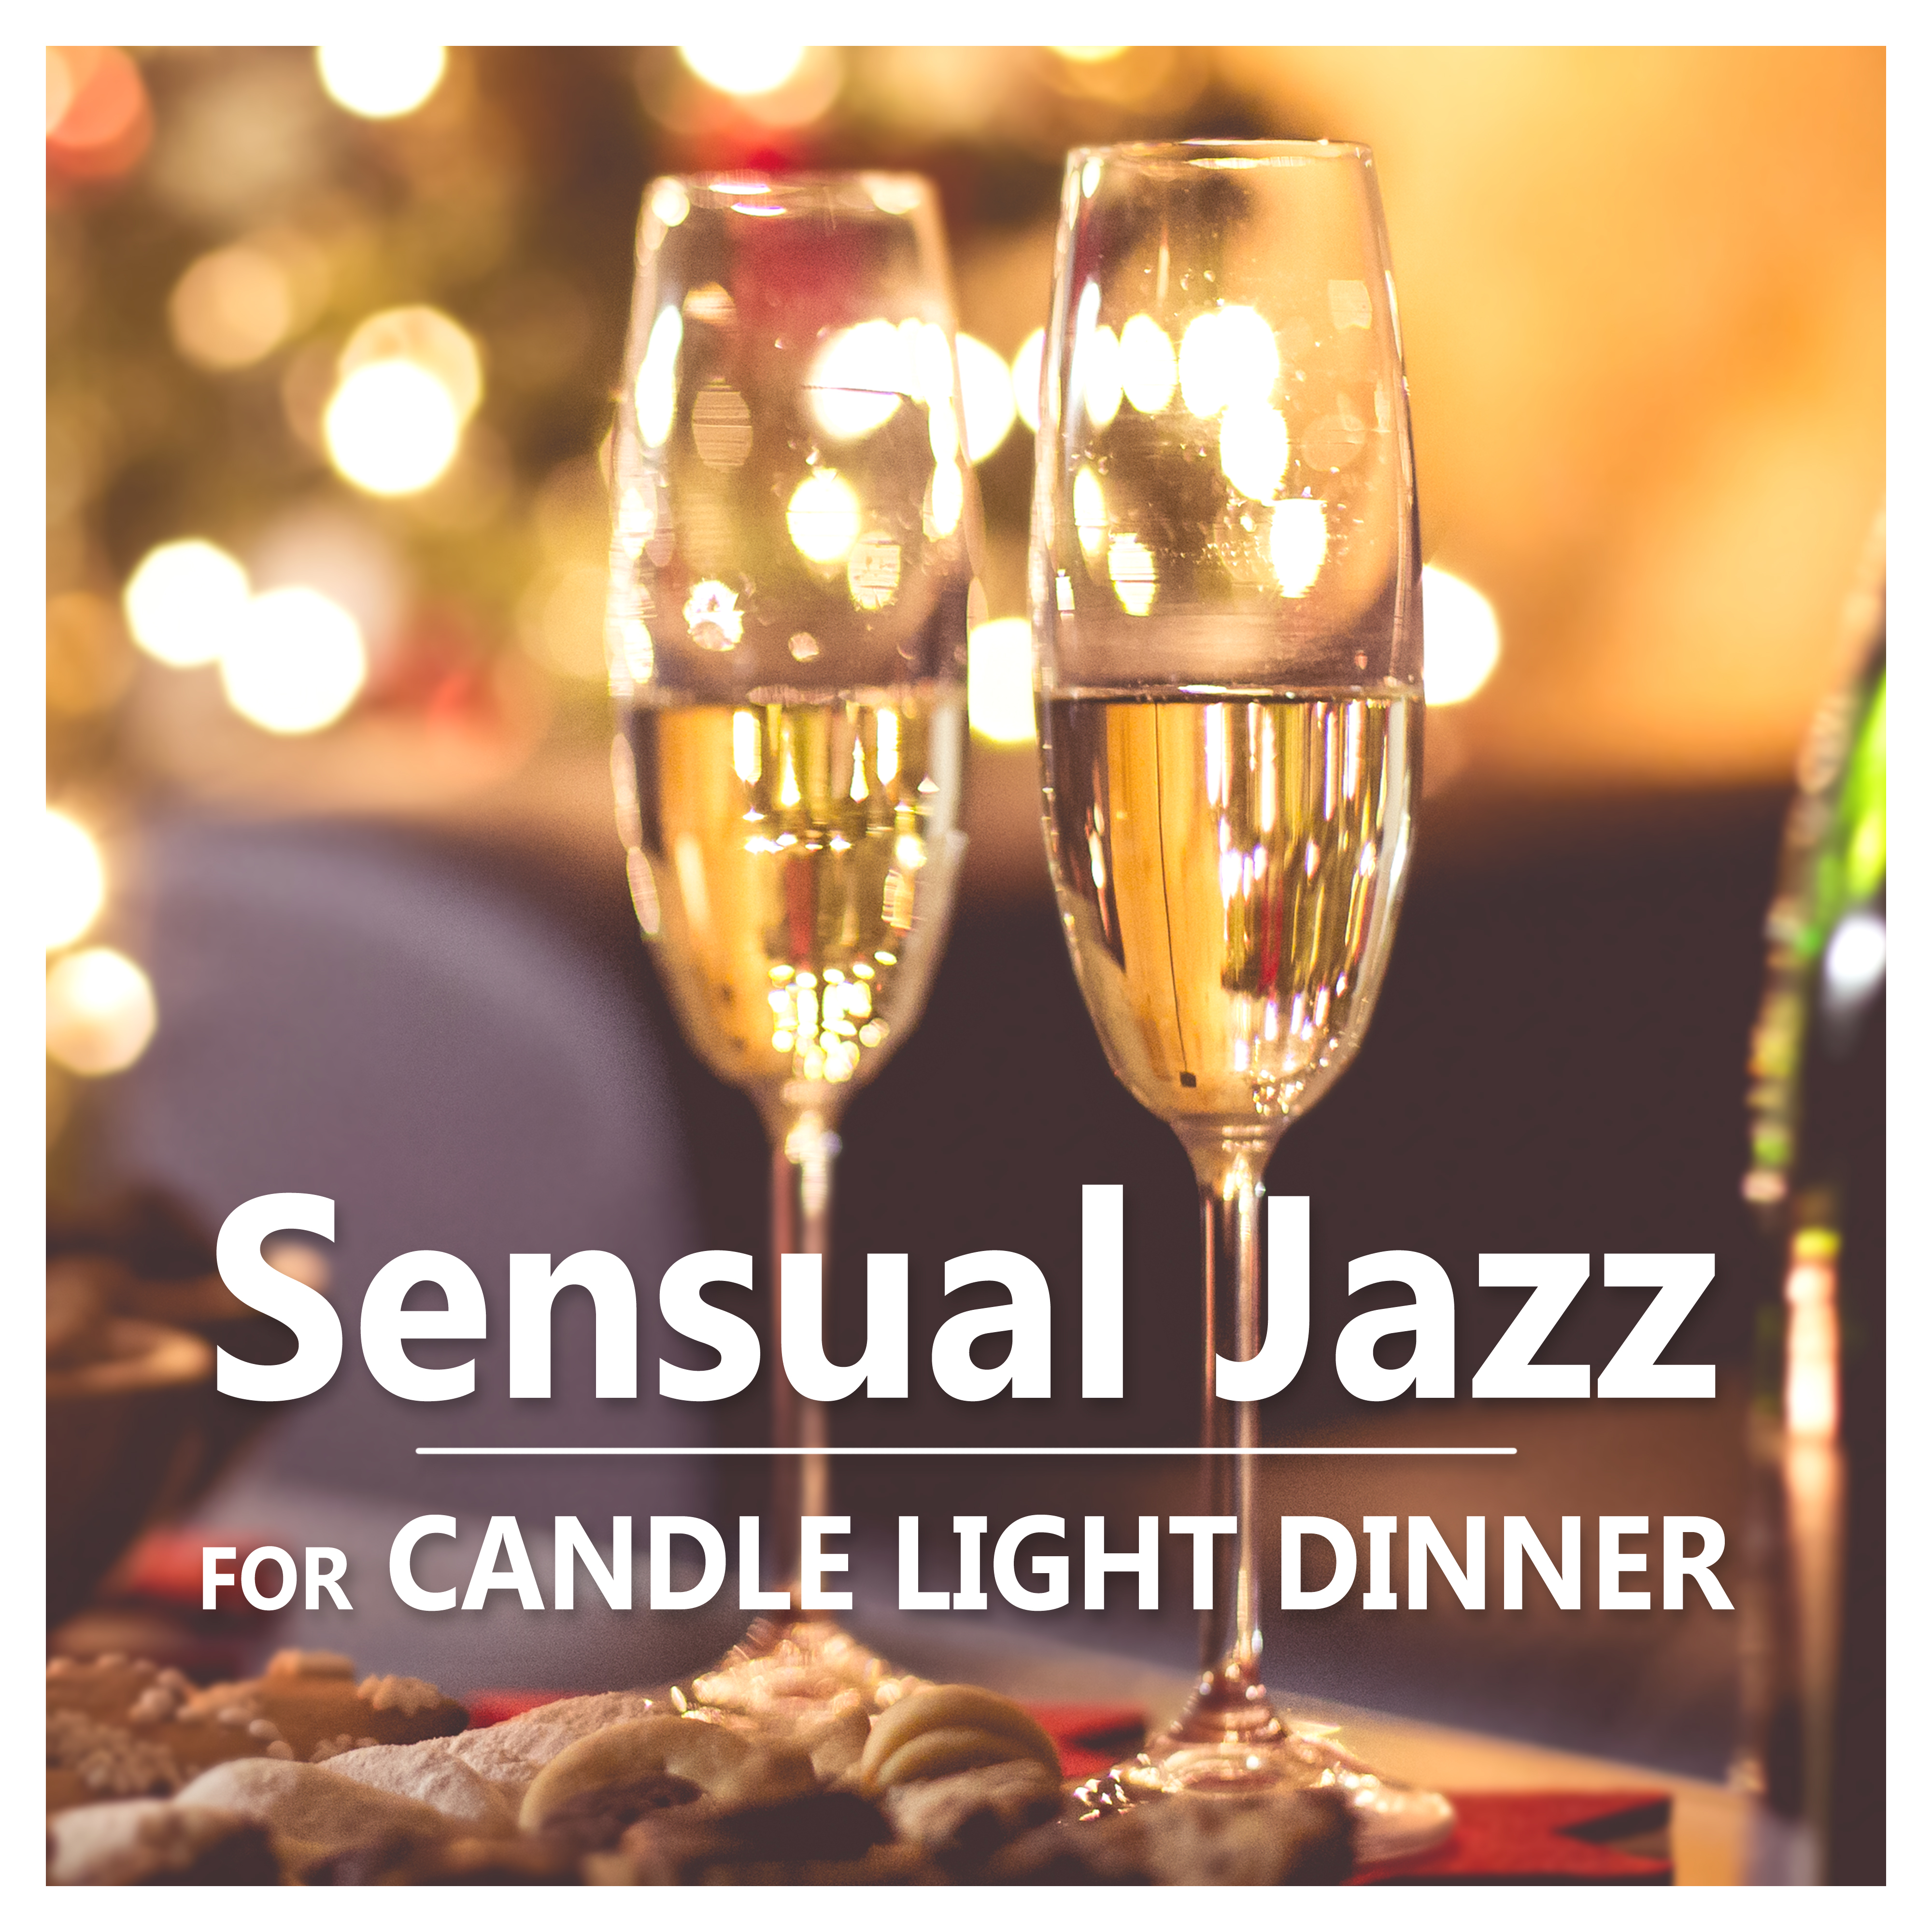 Sensual Jazz for Candle Light Dinner  Romantic Jazz Evening, Soft Sounds for Evening,  Moves, Jazz Relaxation